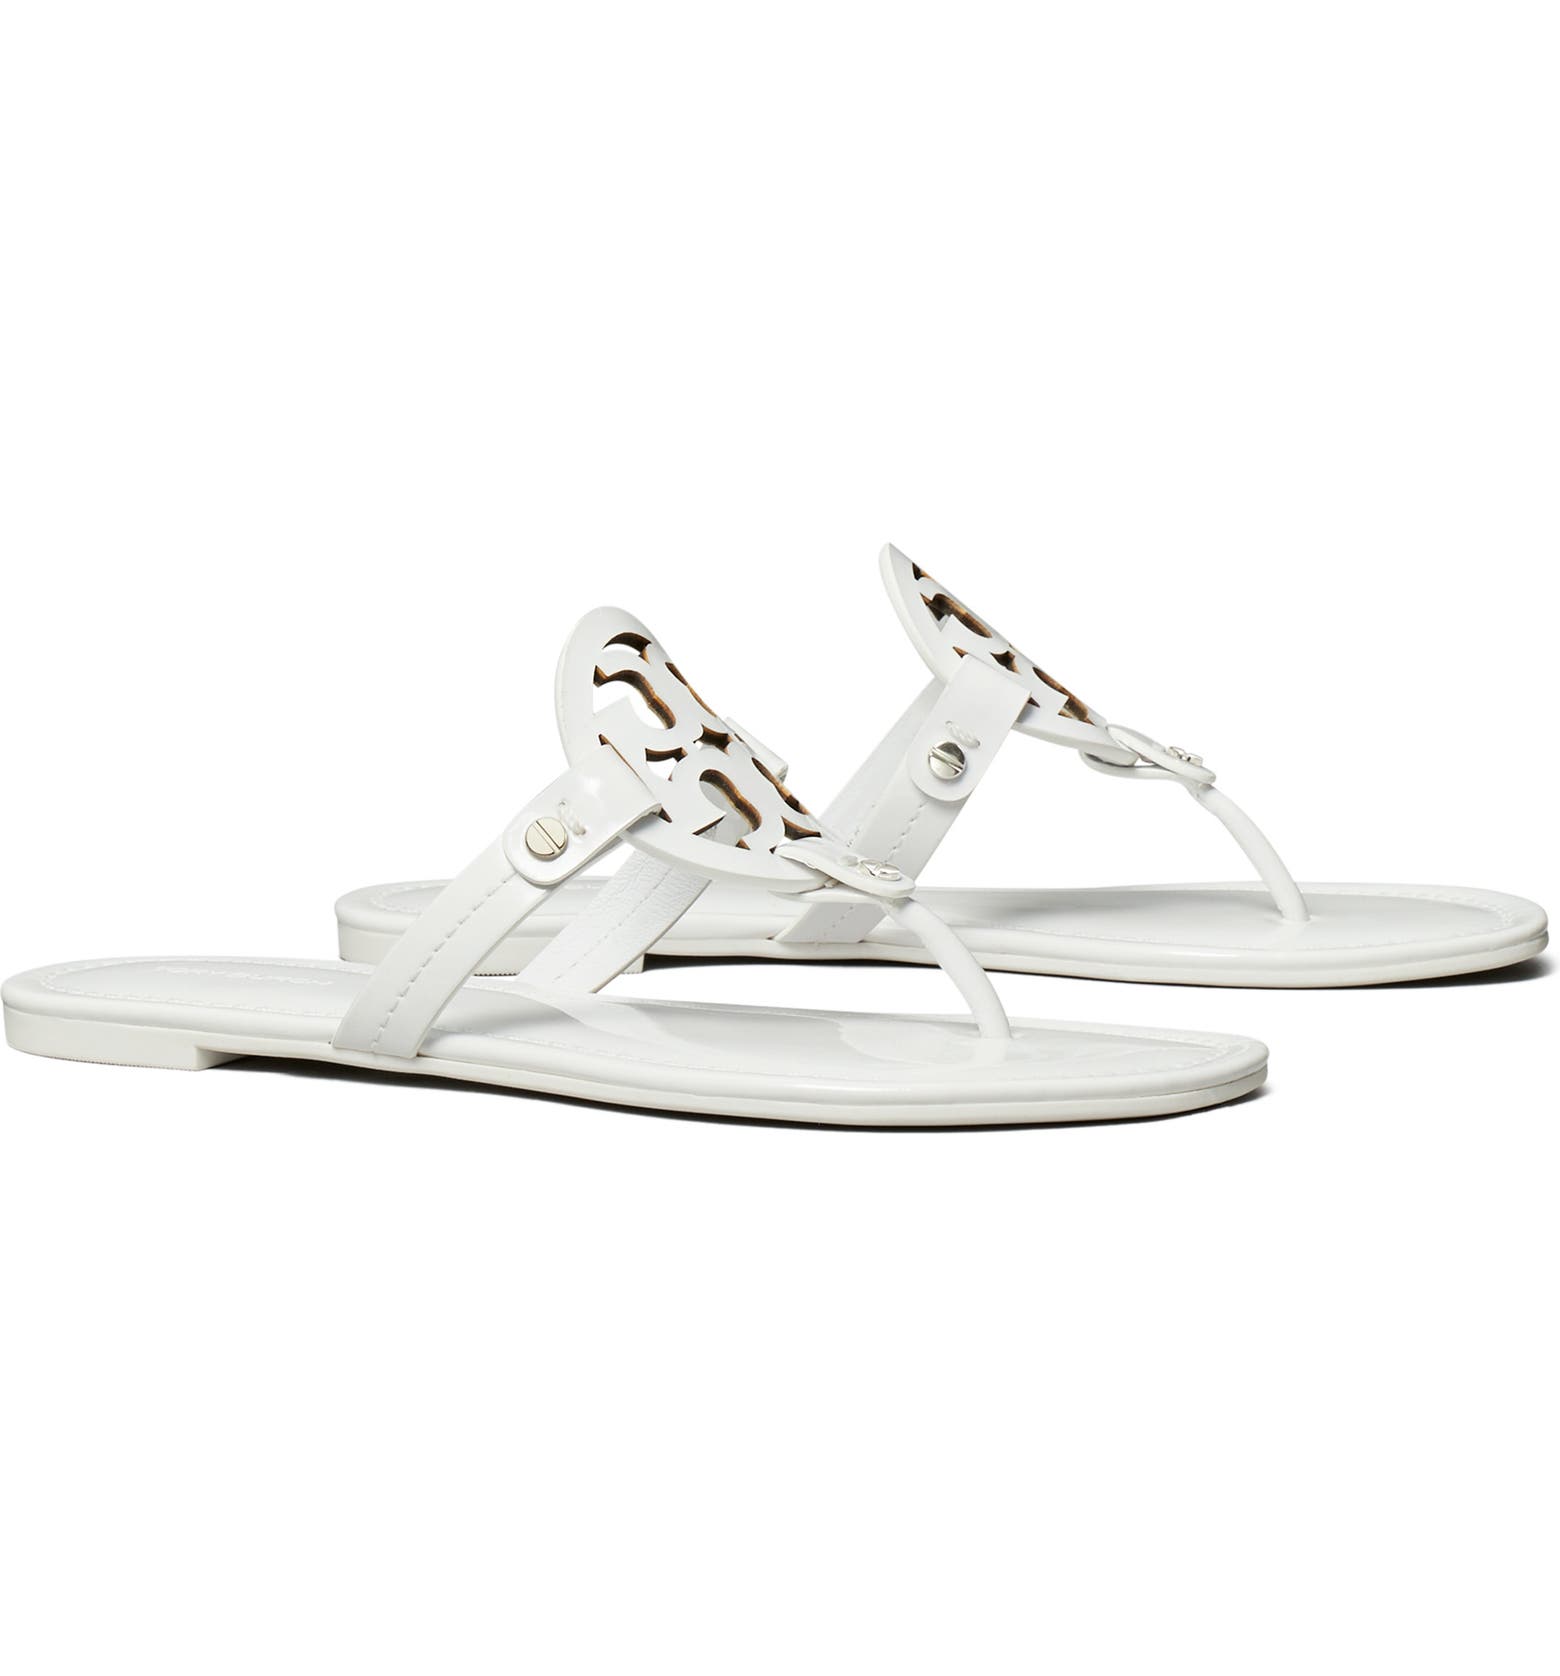 White Tory Burch Miller Leather Sandals